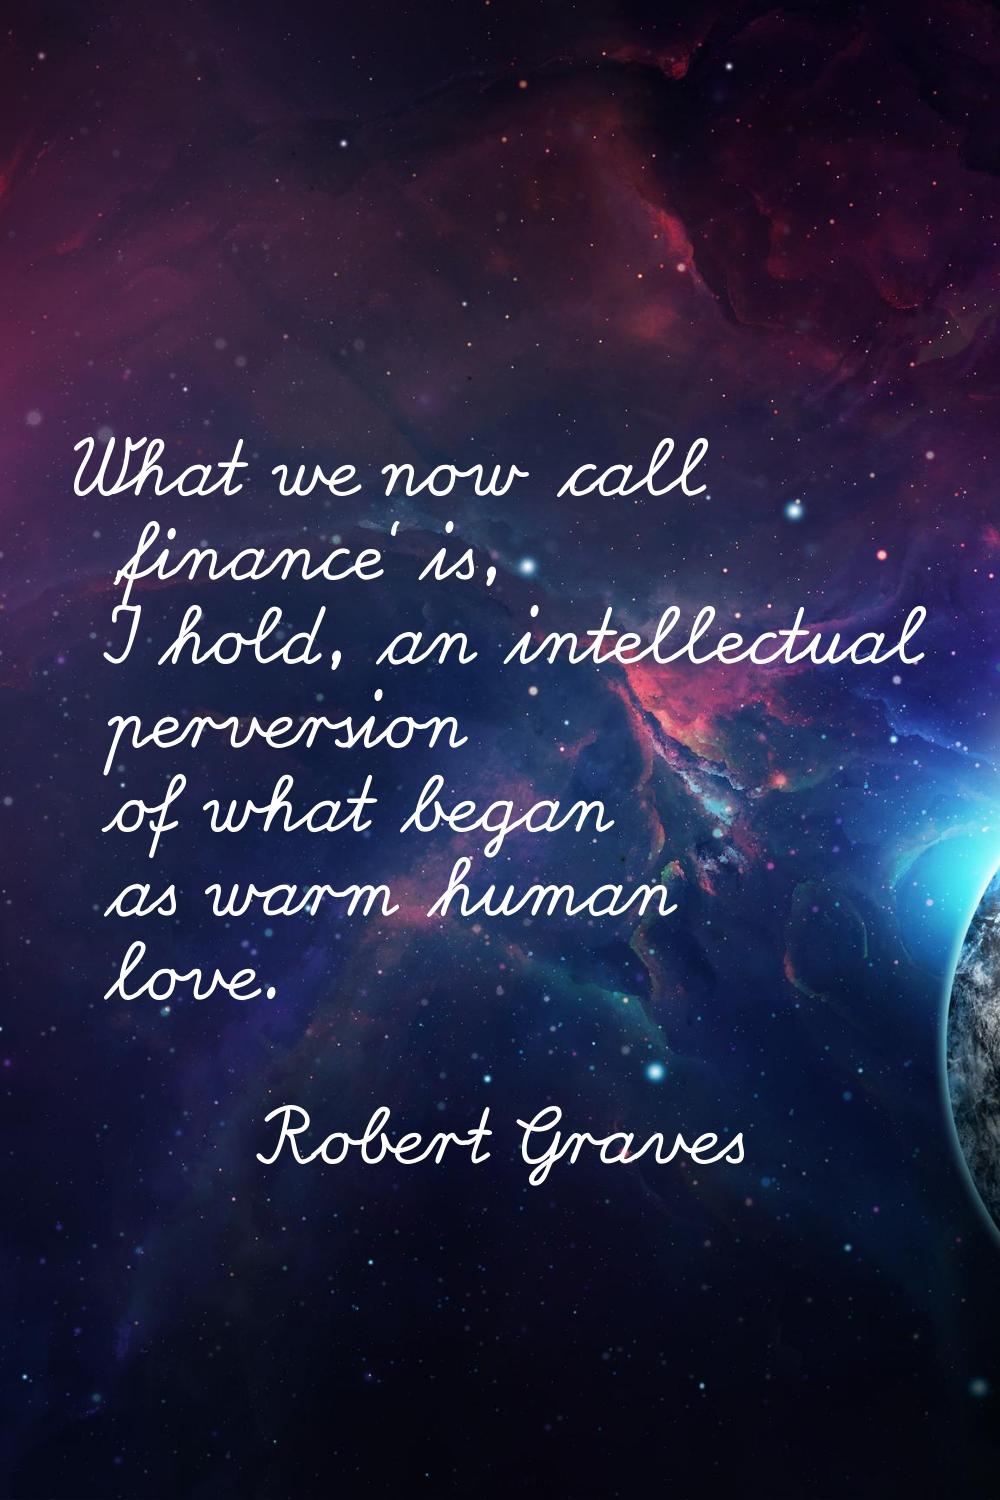 What we now call 'finance' is, I hold, an intellectual perversion of what began as warm human love.